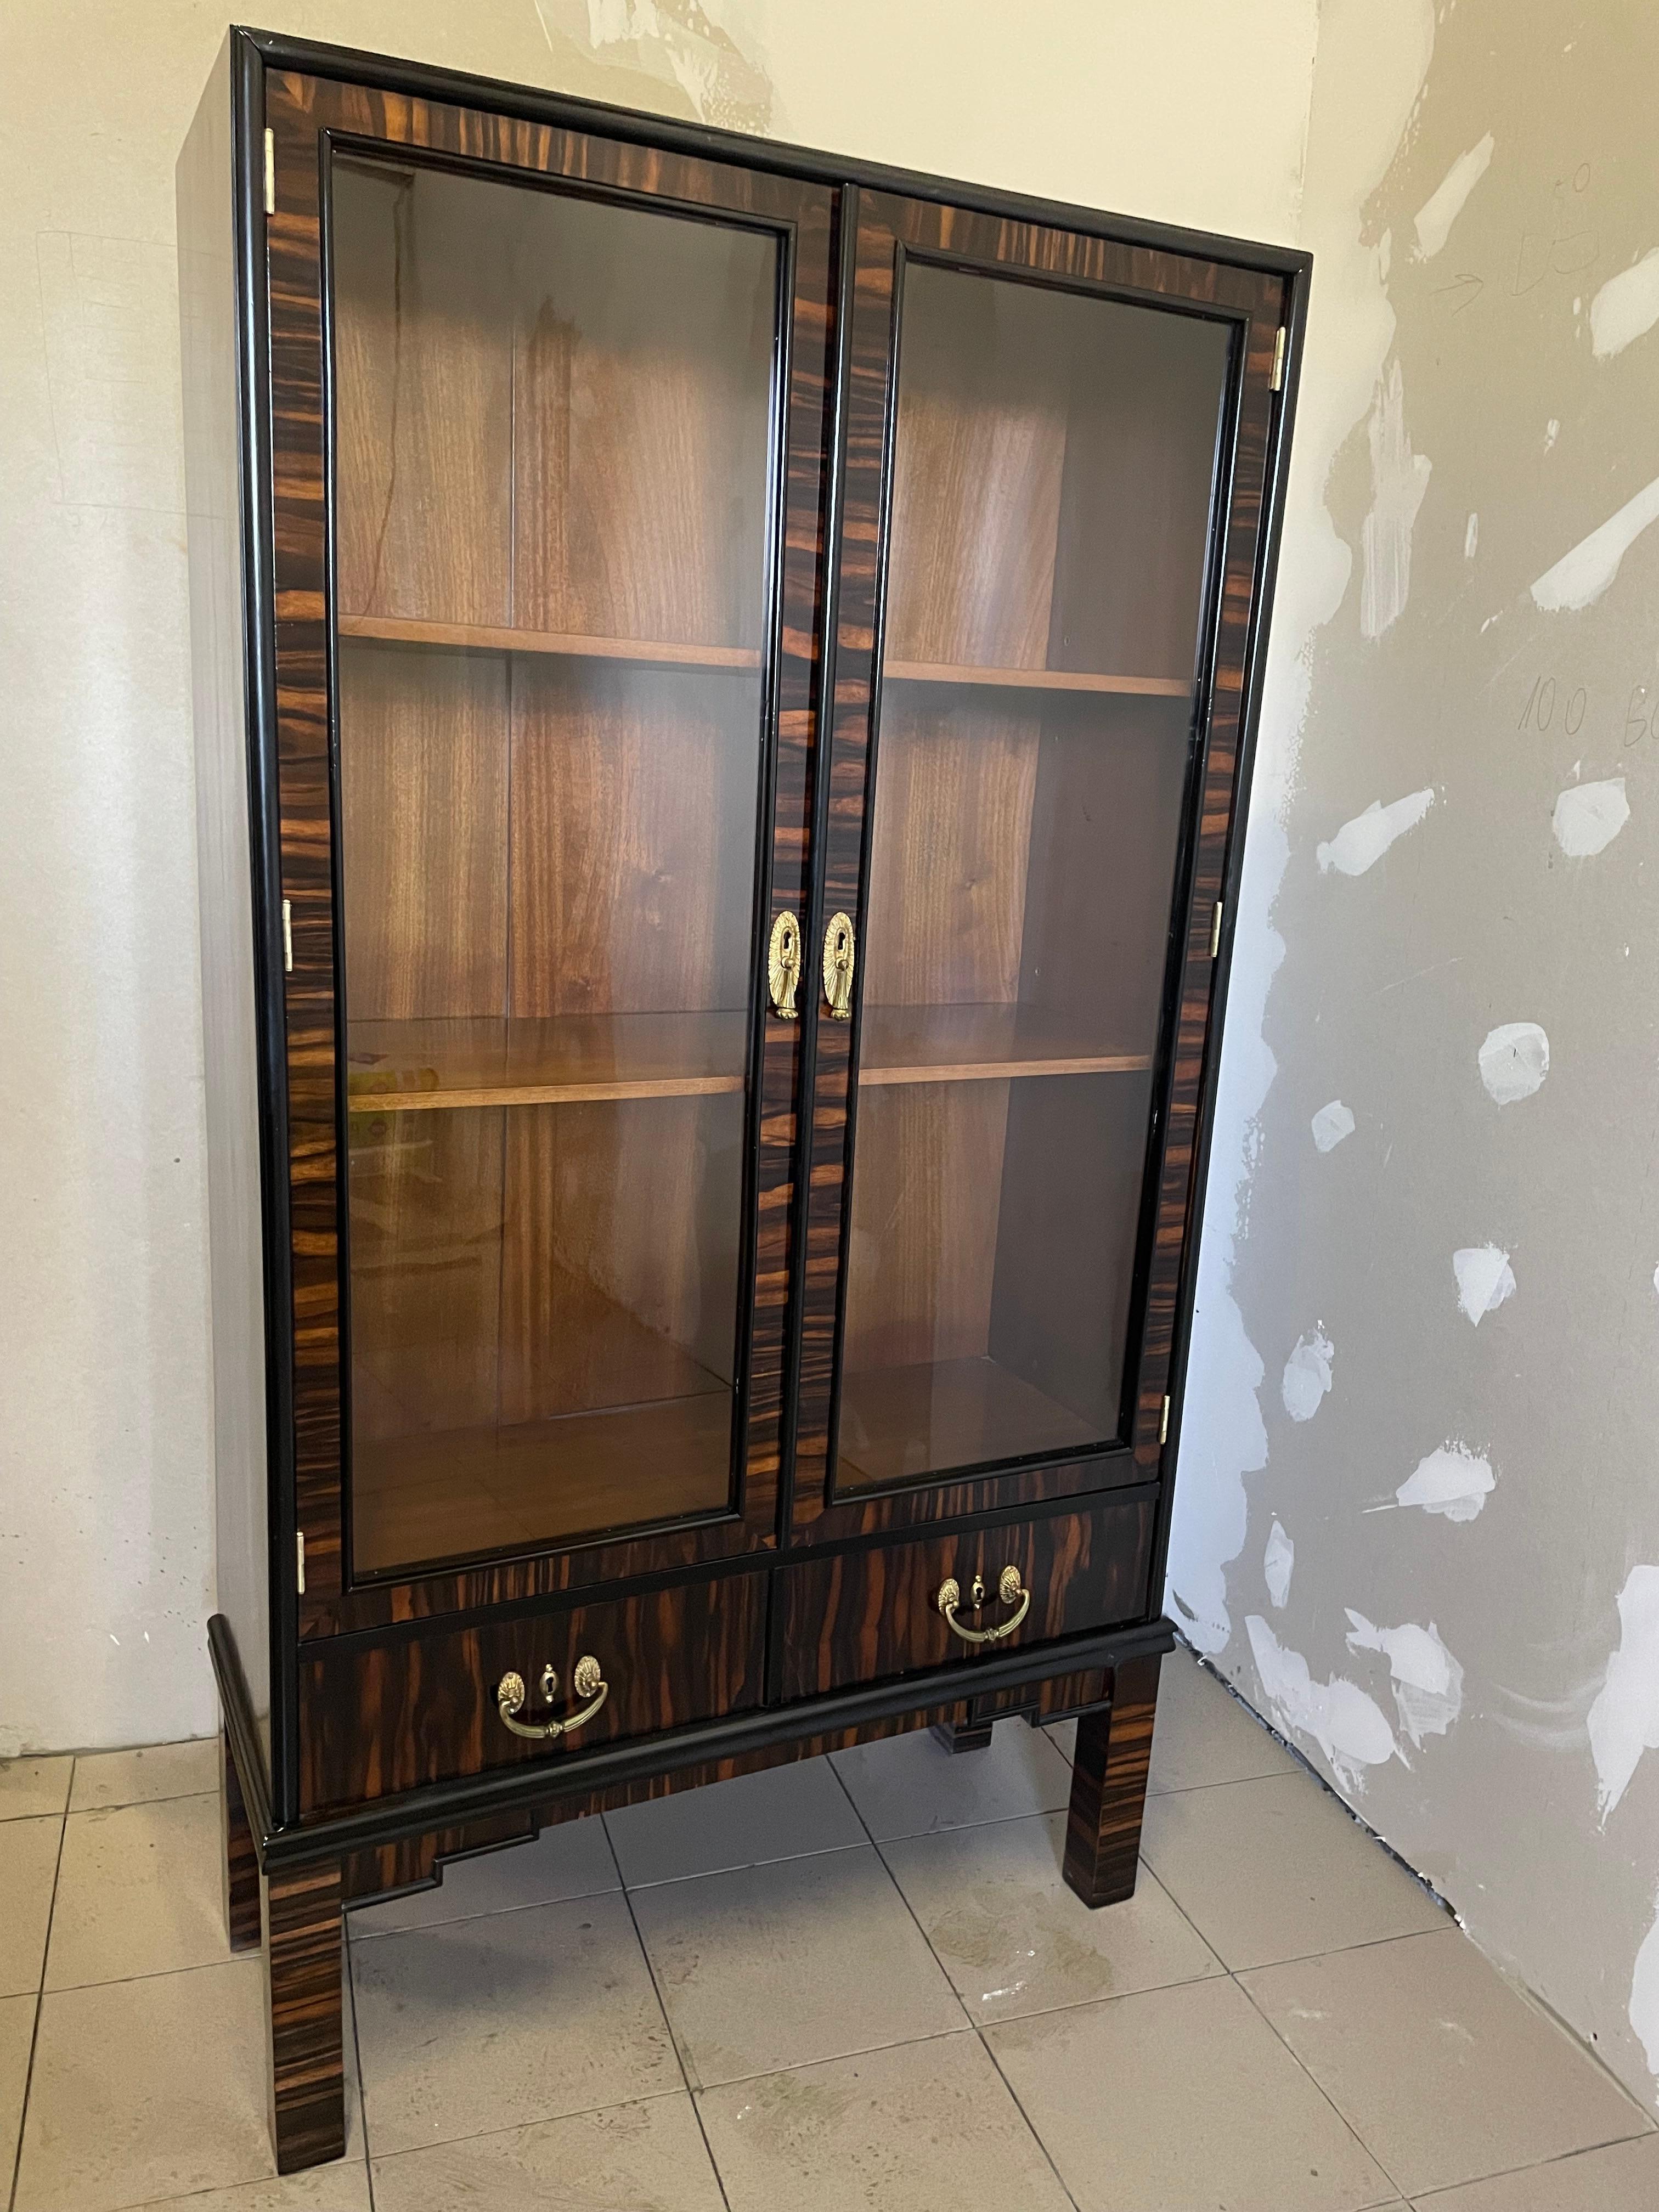 

It has been cleaned to bare veneer, disinfected and finished by hand with high gloss shellac polish.

Every piece of furniture that leaves our workshop from the beginning to the end is subjected to manual renovation, so as to restore its original